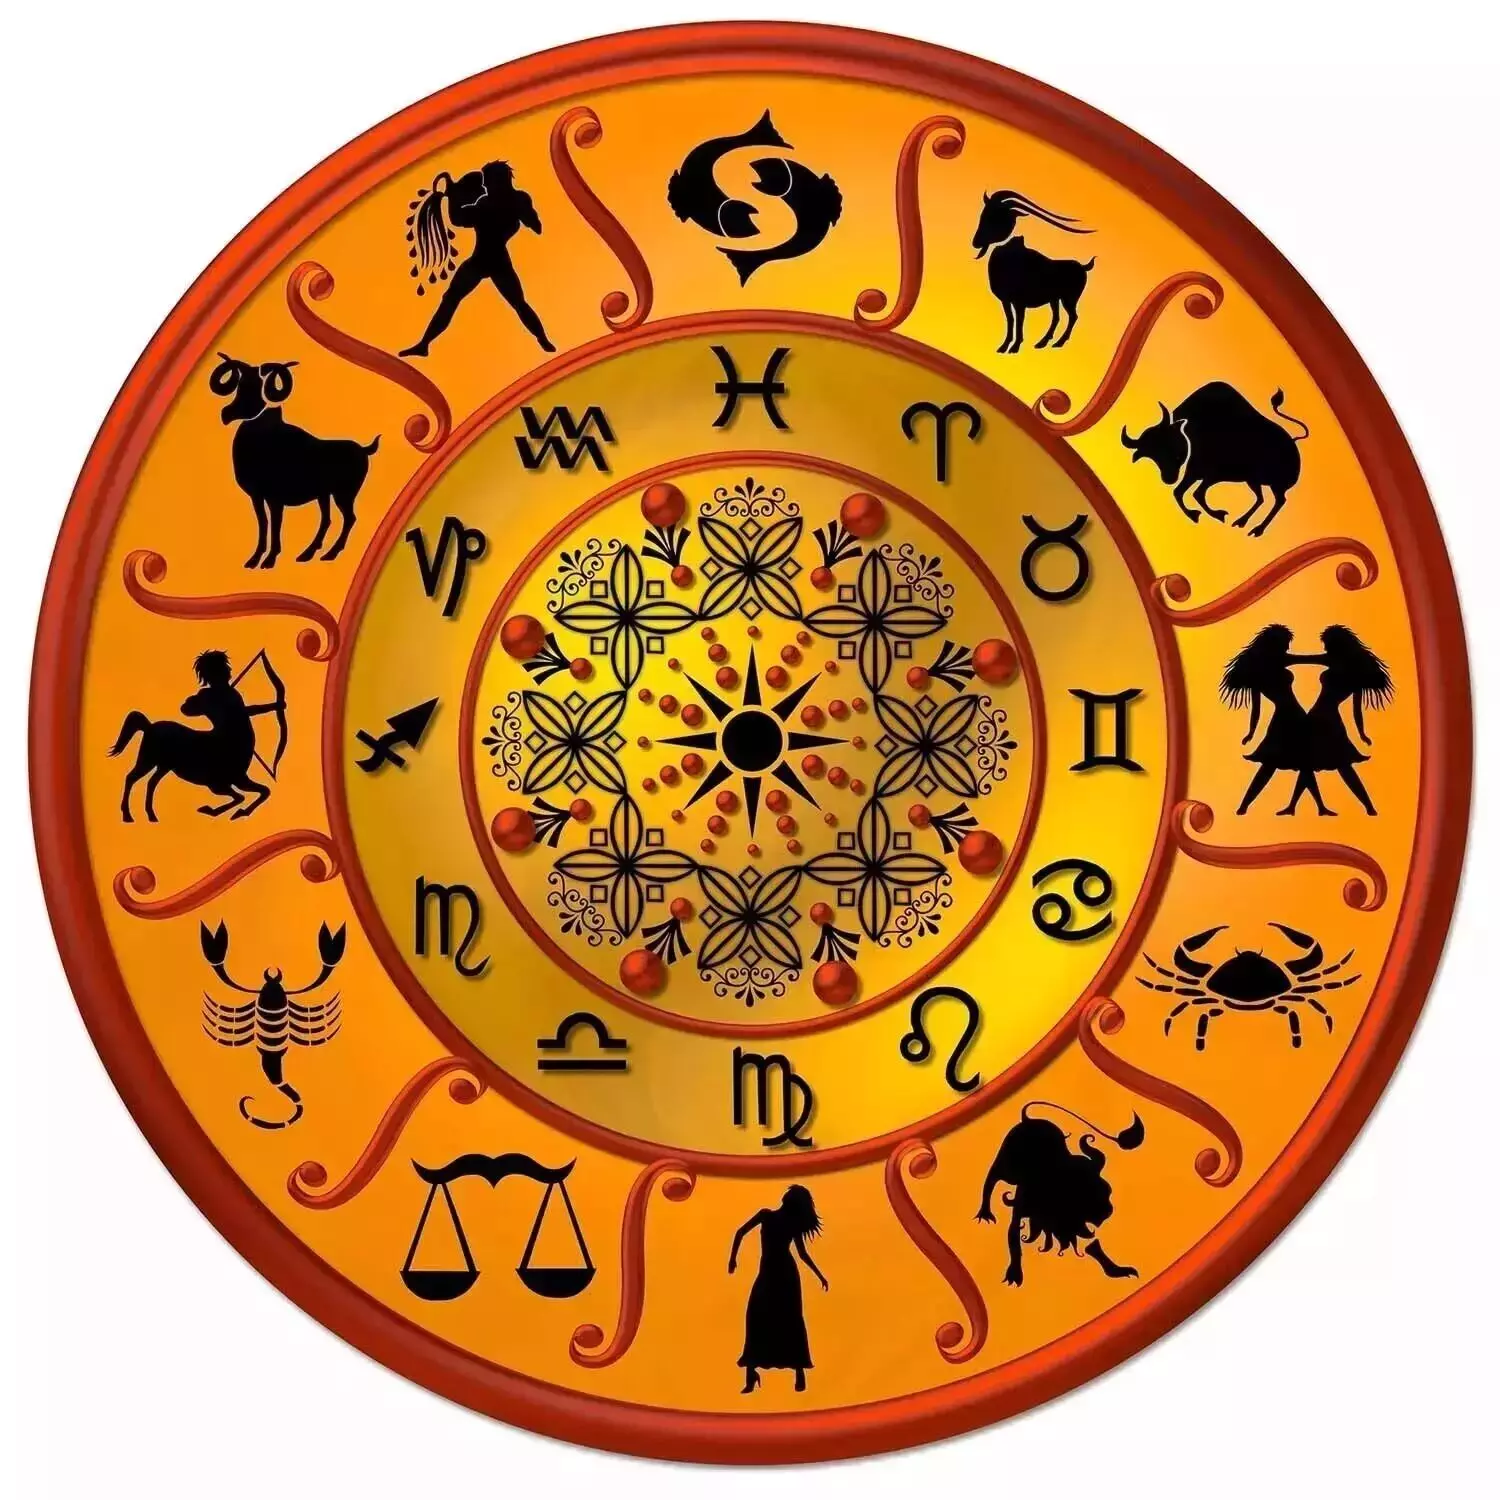 06 December – Know your todays horoscope